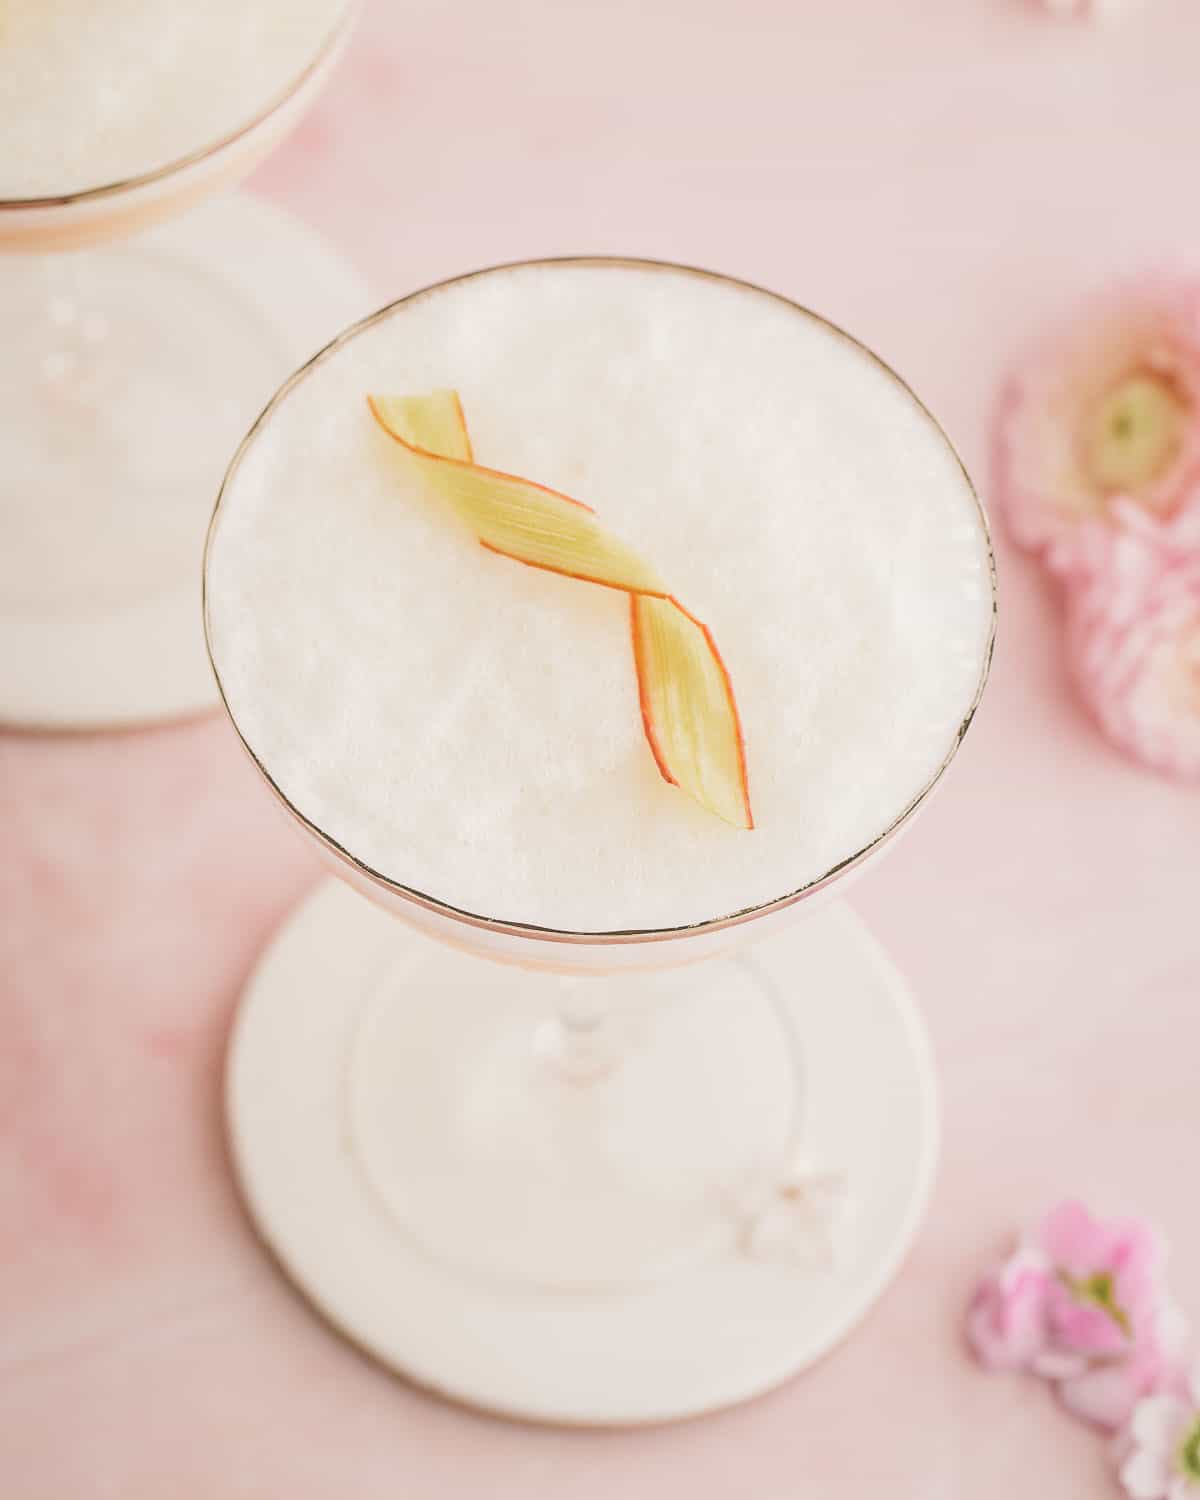 Top view of rhubarb gin sour with foam and candied rhubarb ribbon garnished, on a pink surface surrounded by pink flowers. 